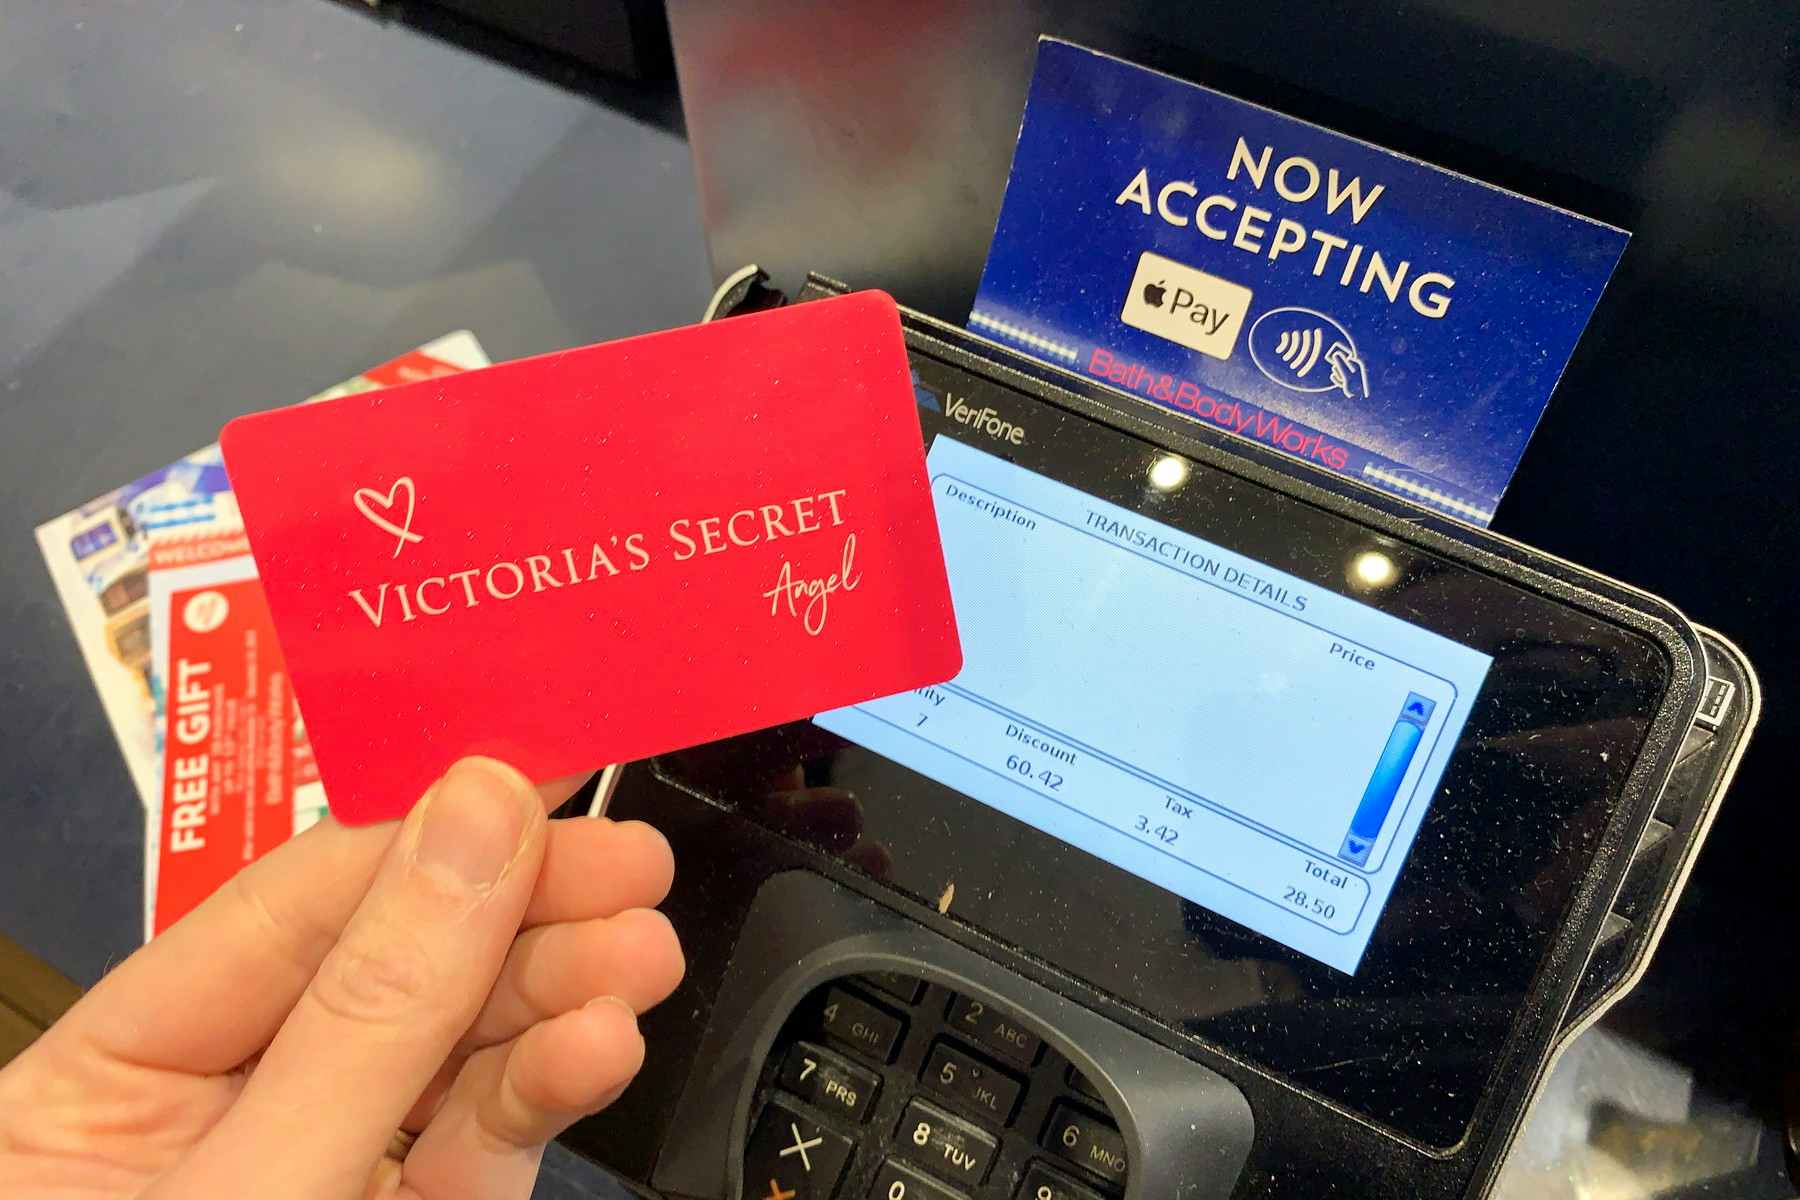 A person's hand holding their Victoria's Secret Angel Card above the point-of-sale machine at Bath & Body Works.